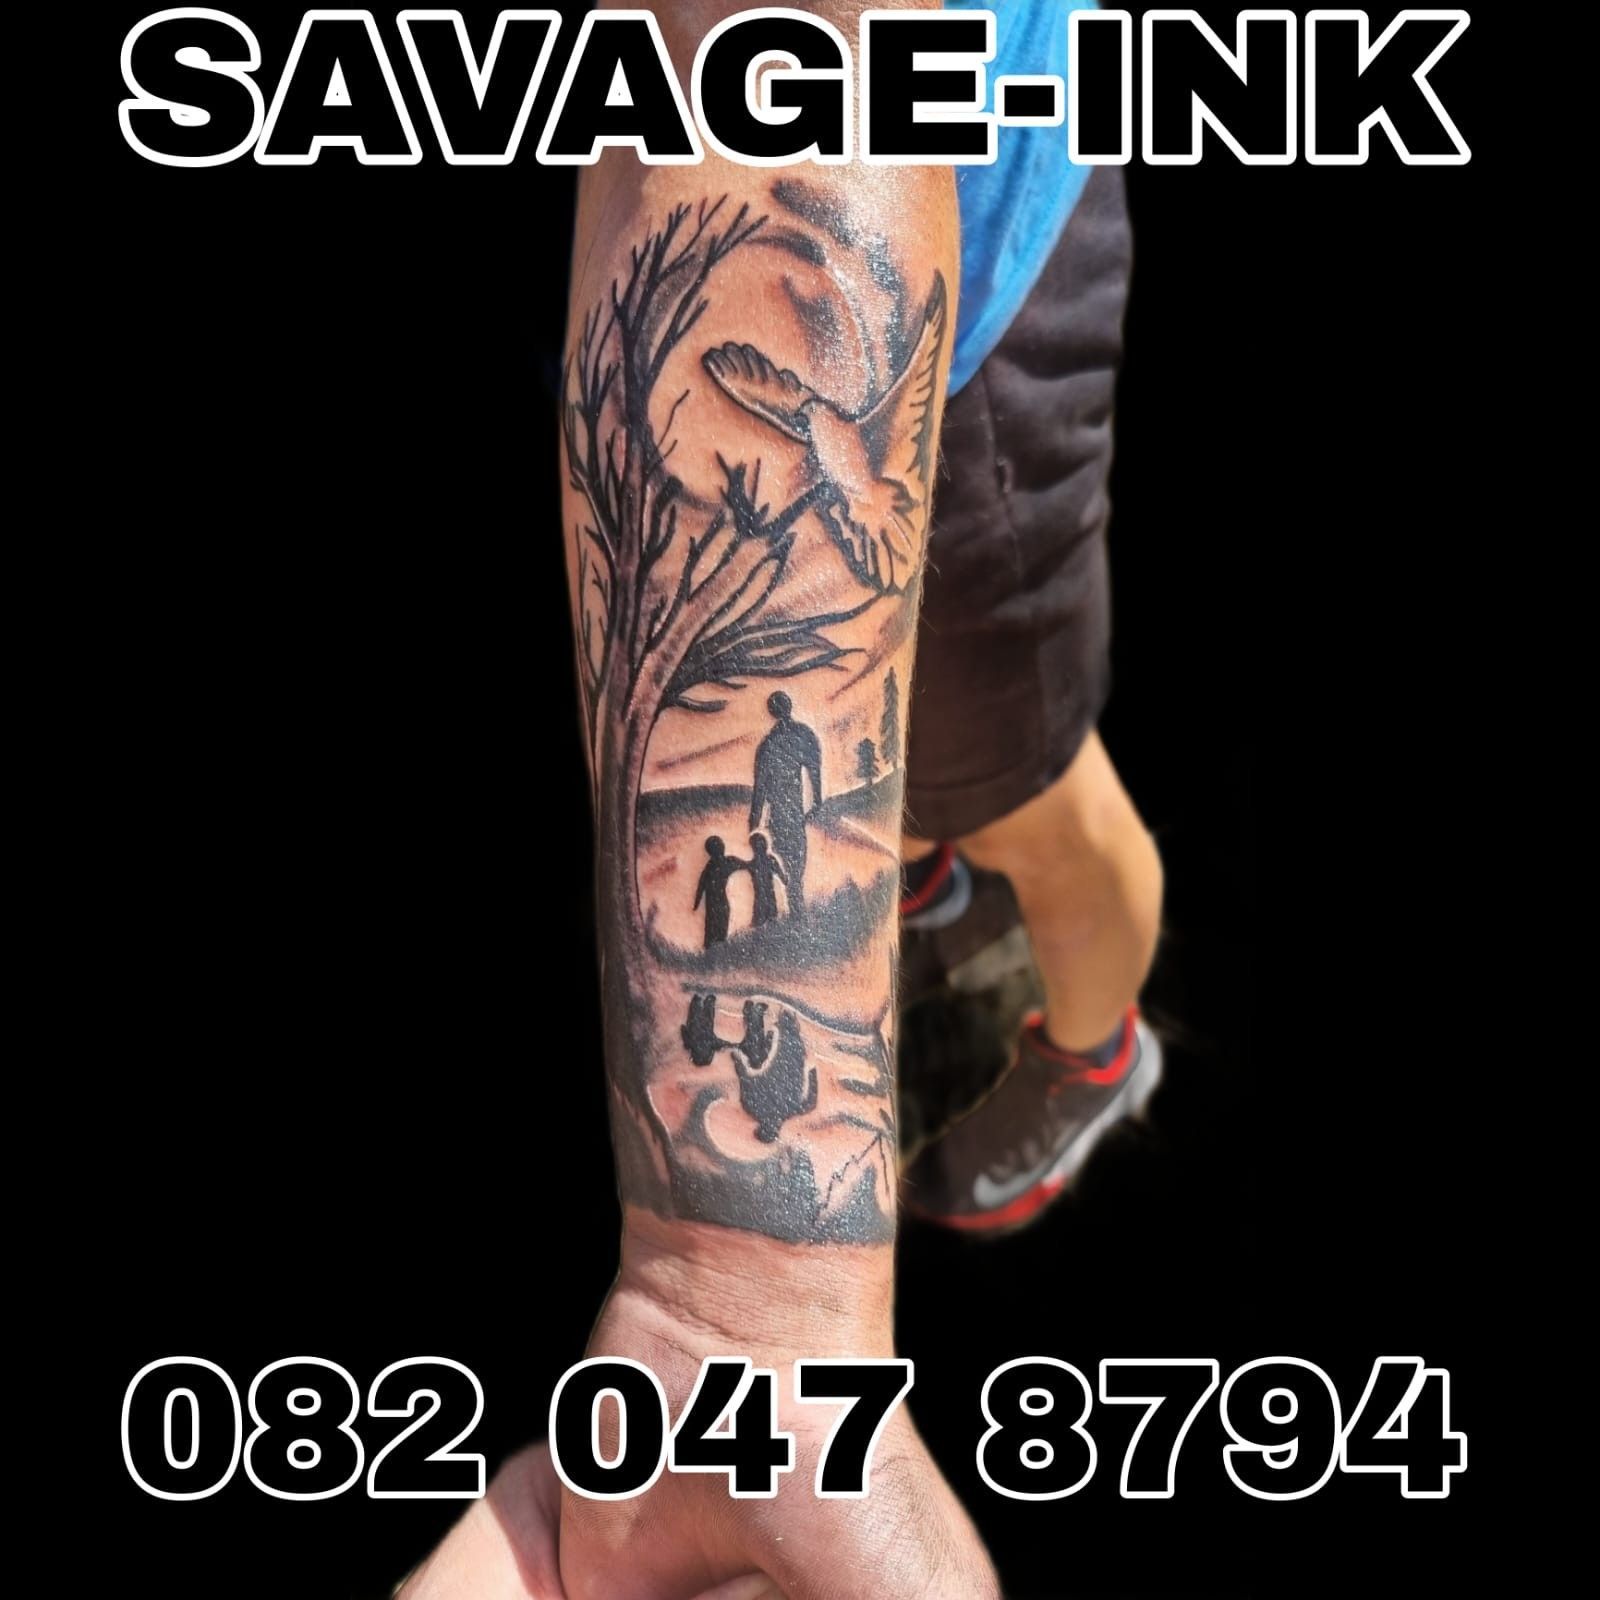 ☆SPECIAL☆ Any Tattoo For Only 15x15 portfolio